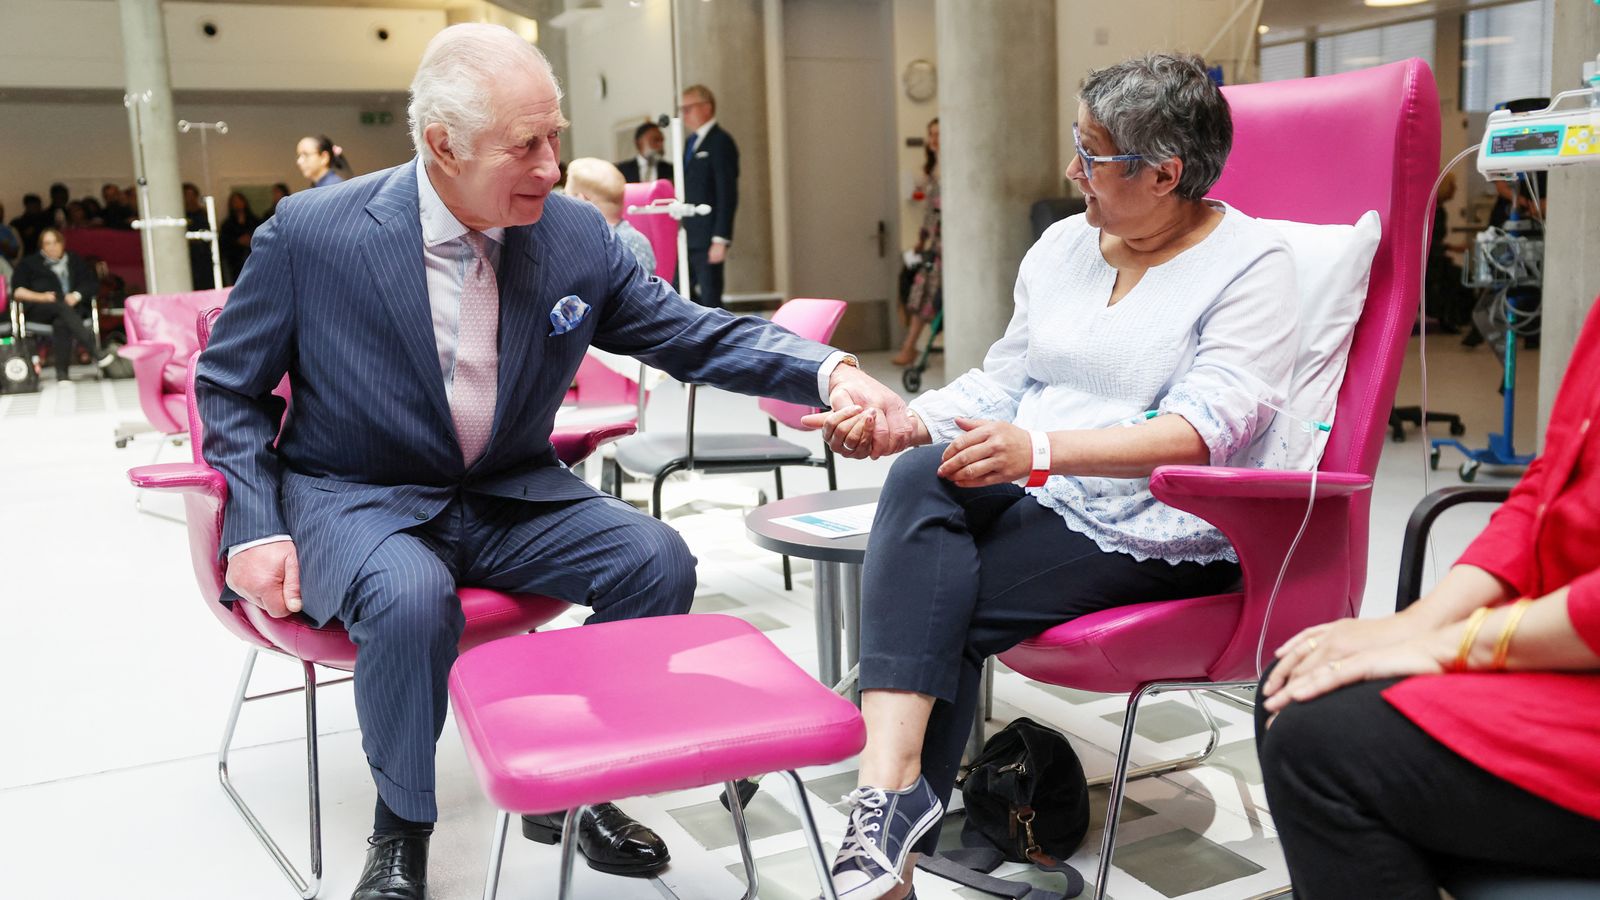 King Charles holds hands with cancer patients as he returns to public duties after own diagnosis